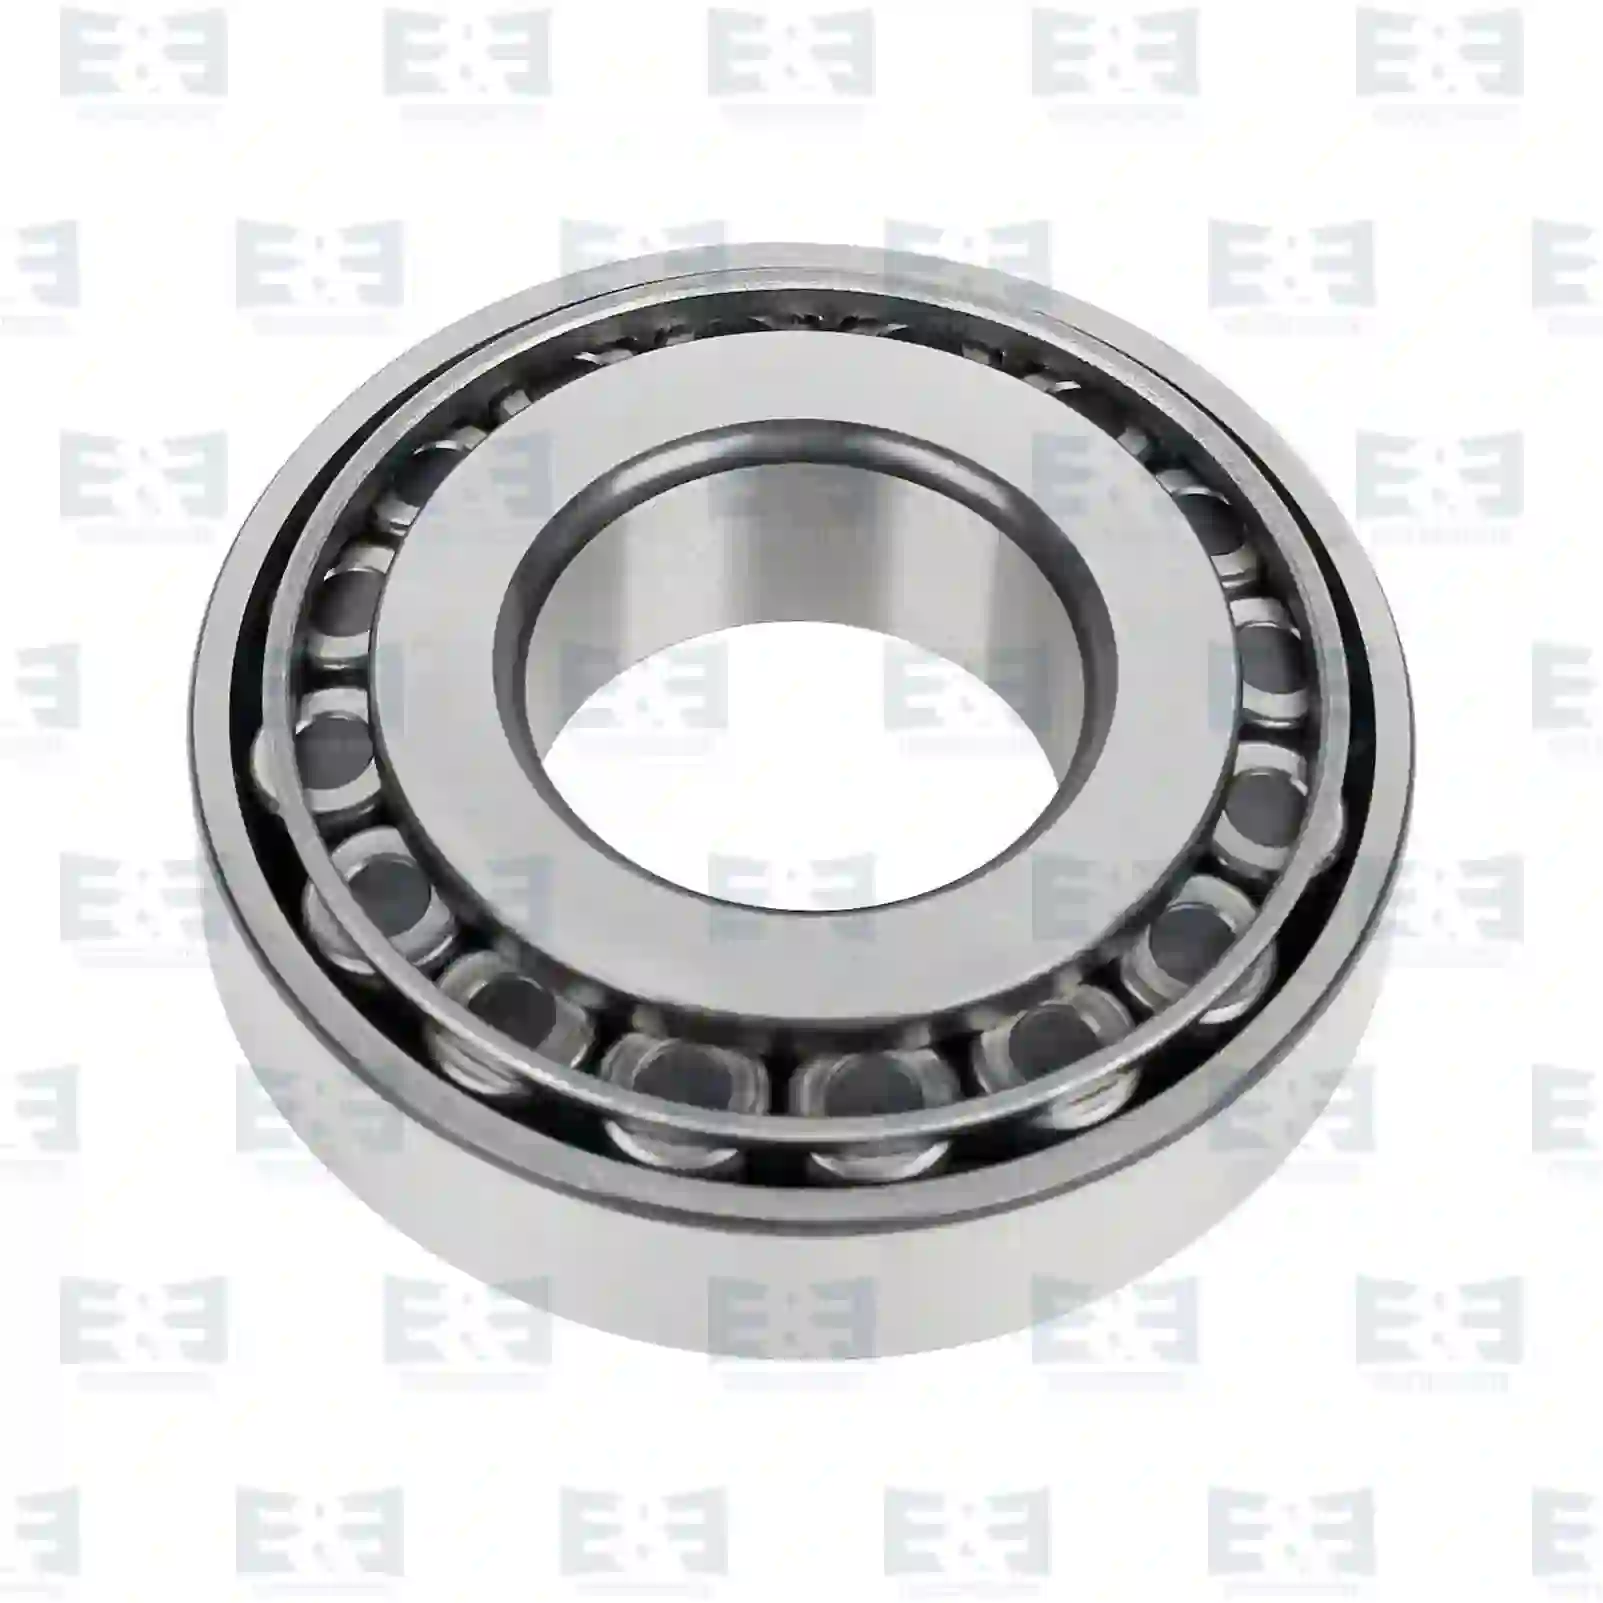 Bearings Tapered roller bearing, EE No 2E2286229 ,  oem no:01109981, 26800370, 94032605, 94034275, 94034276, 988445106, 988445106A, 1-09812026-0, 1-09812027-0, 5-09812063-0, 00819014, 01109981, 01109982, 26800370, 000720030309, 0019813705, 0019814605, 0019815105, 0069814205, 0099810305, 0109815905, 0109816305, 38140-86160, 38324-Z5000, 0773030900, 4200001200, 177802, 26800370 E&E Truck Spare Parts | Truck Spare Parts, Auotomotive Spare Parts